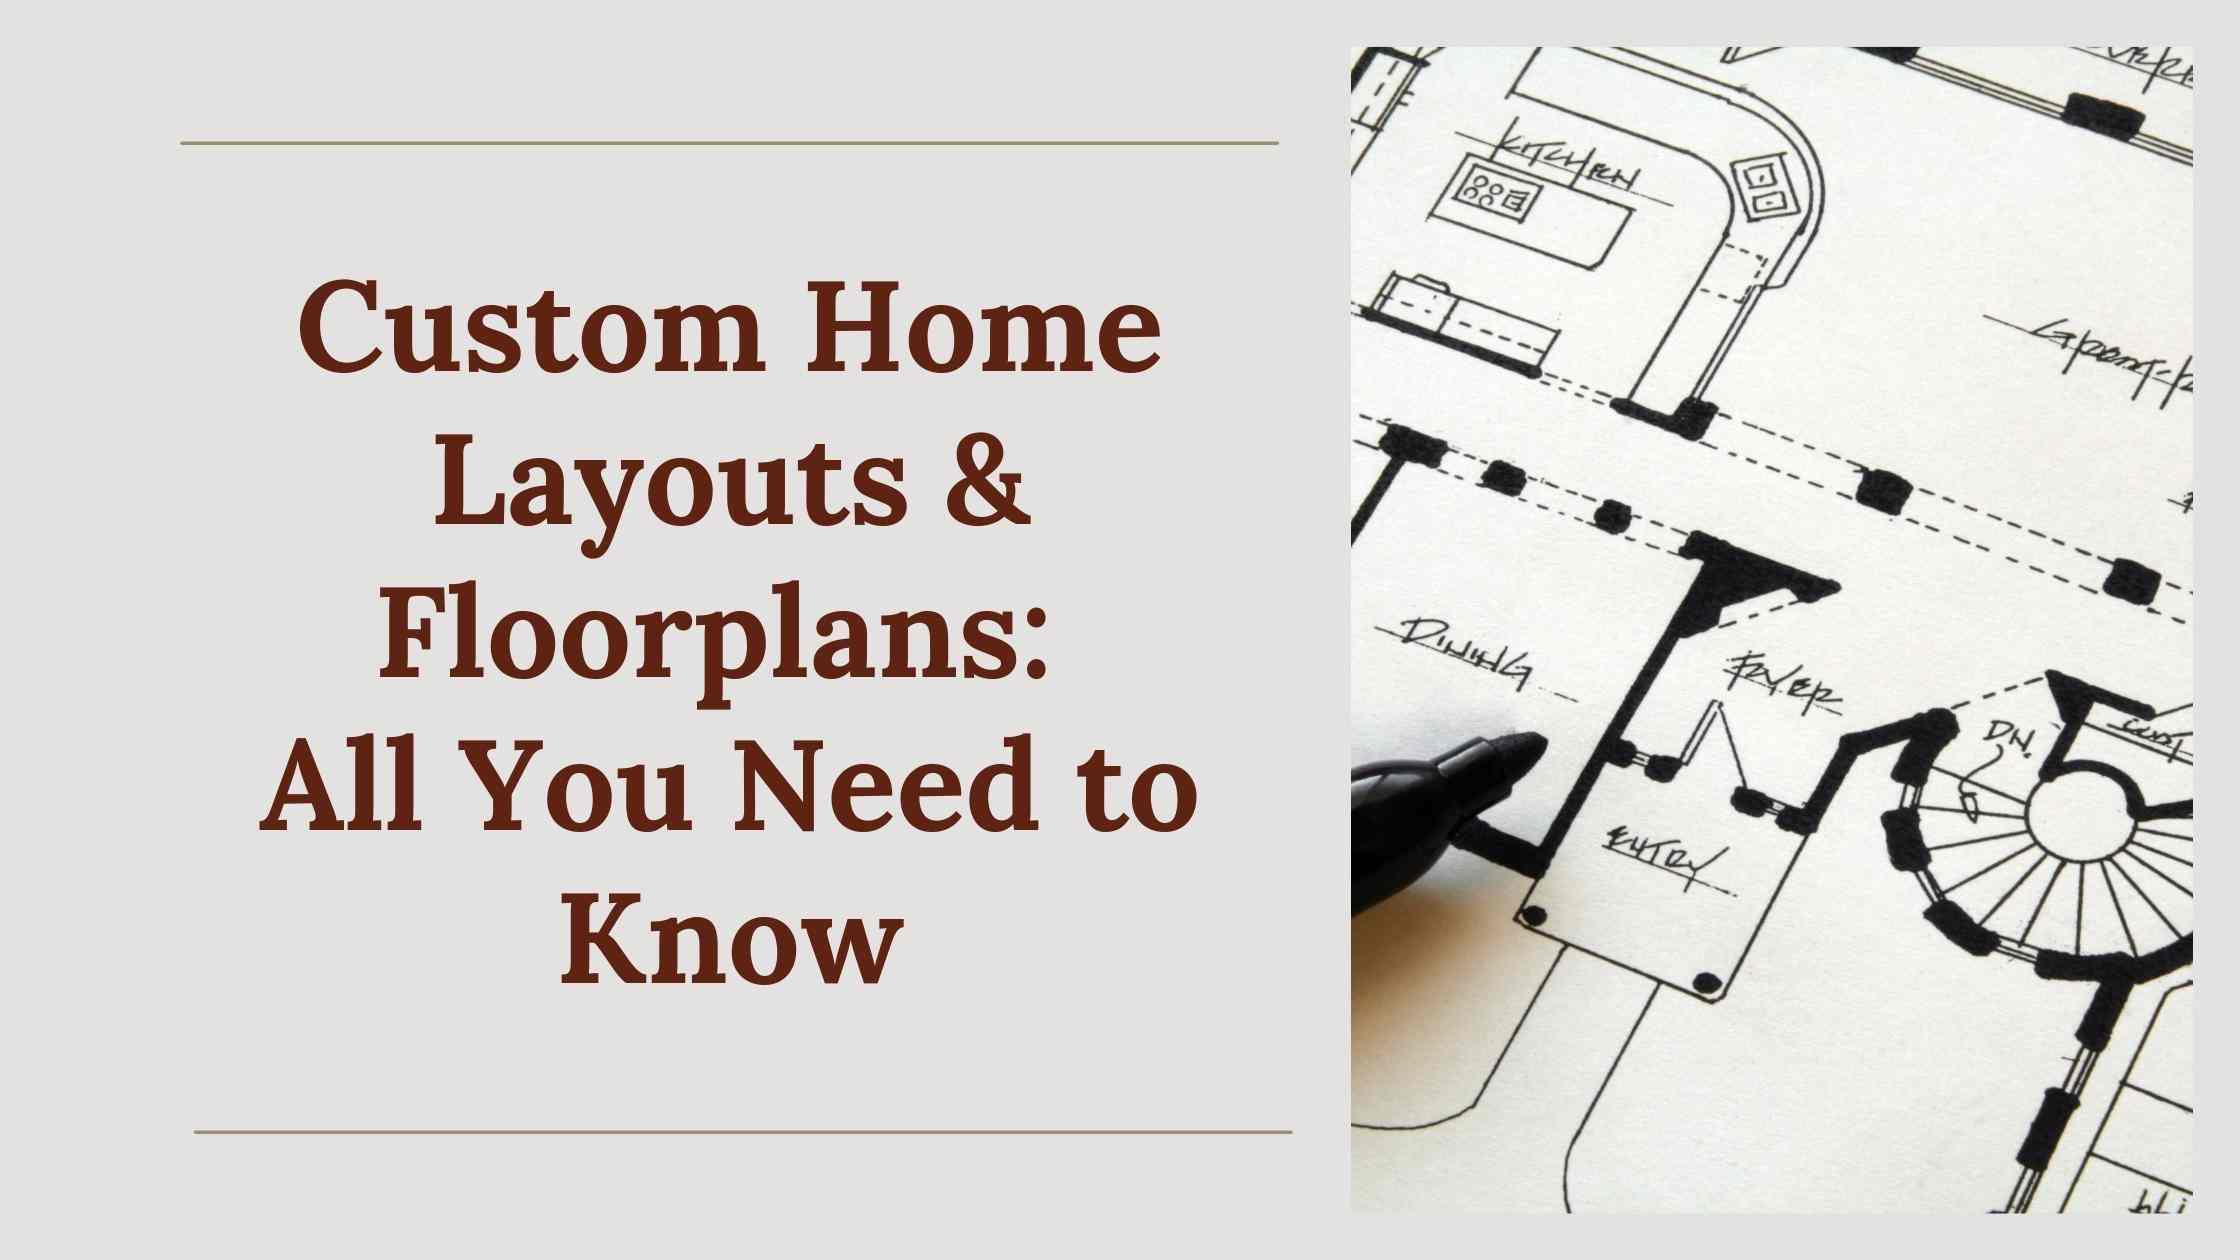 Custom Home Layouts & Floorplans: All You Need to Know